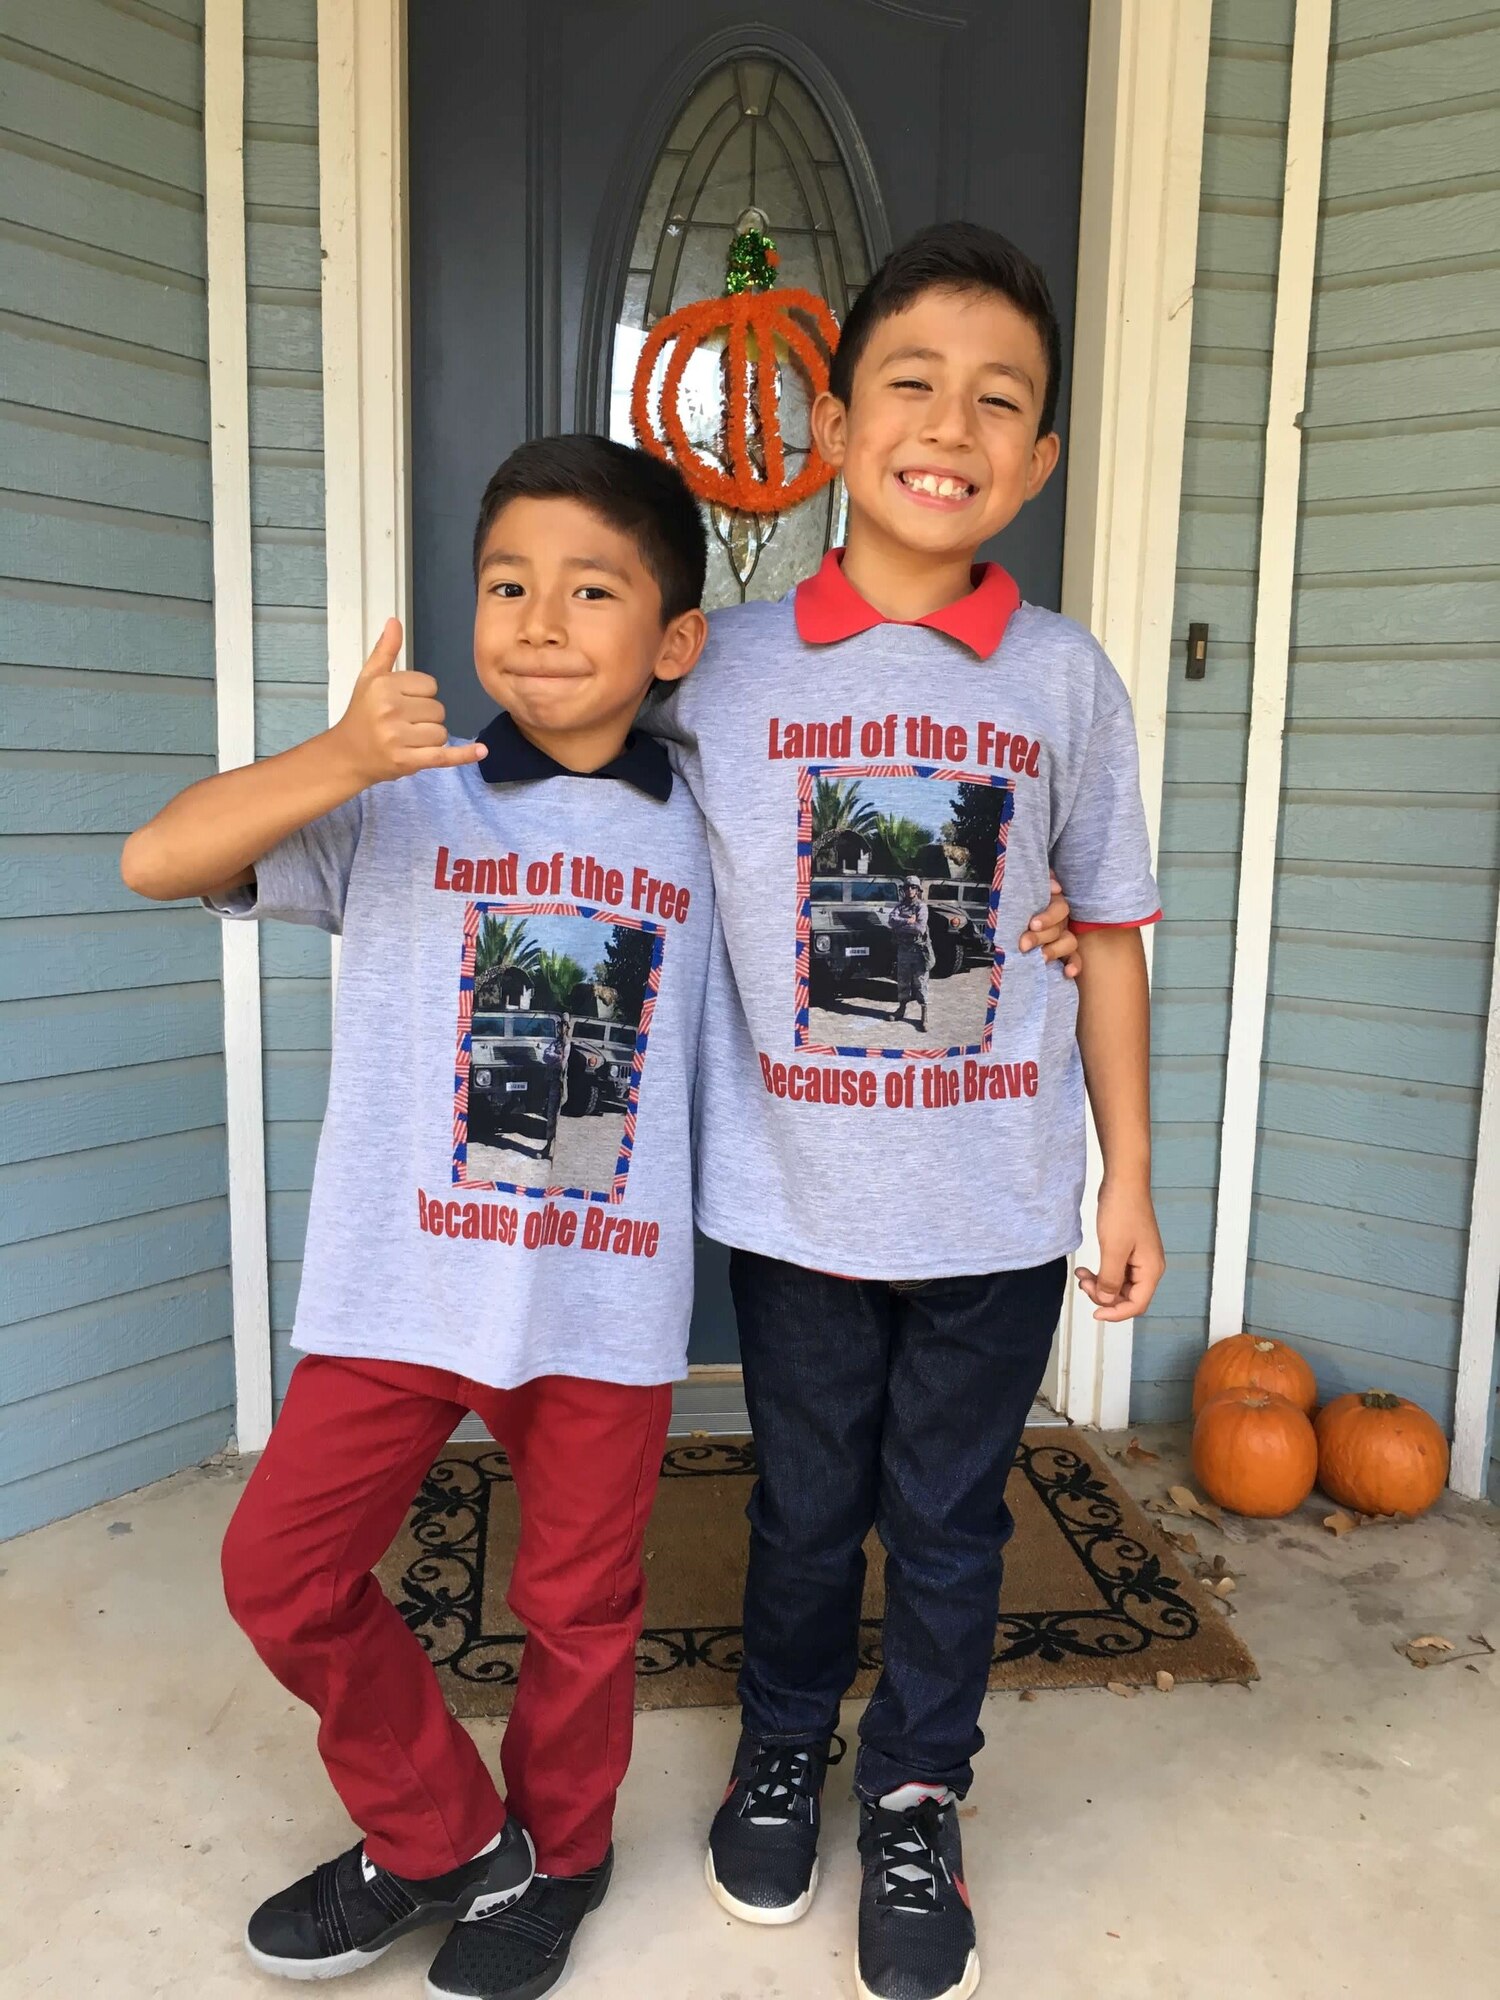 U.S. Air Force military children, Anthony and Ayden, pose for a photo on Veterans Day in 2016. Their father was serving on a short tour assignment for 15 months. Month of the Military Child highlights and recognizes the sacrifices, resilience and perseverance of military children. (U.S. Air Force courtesy photo)